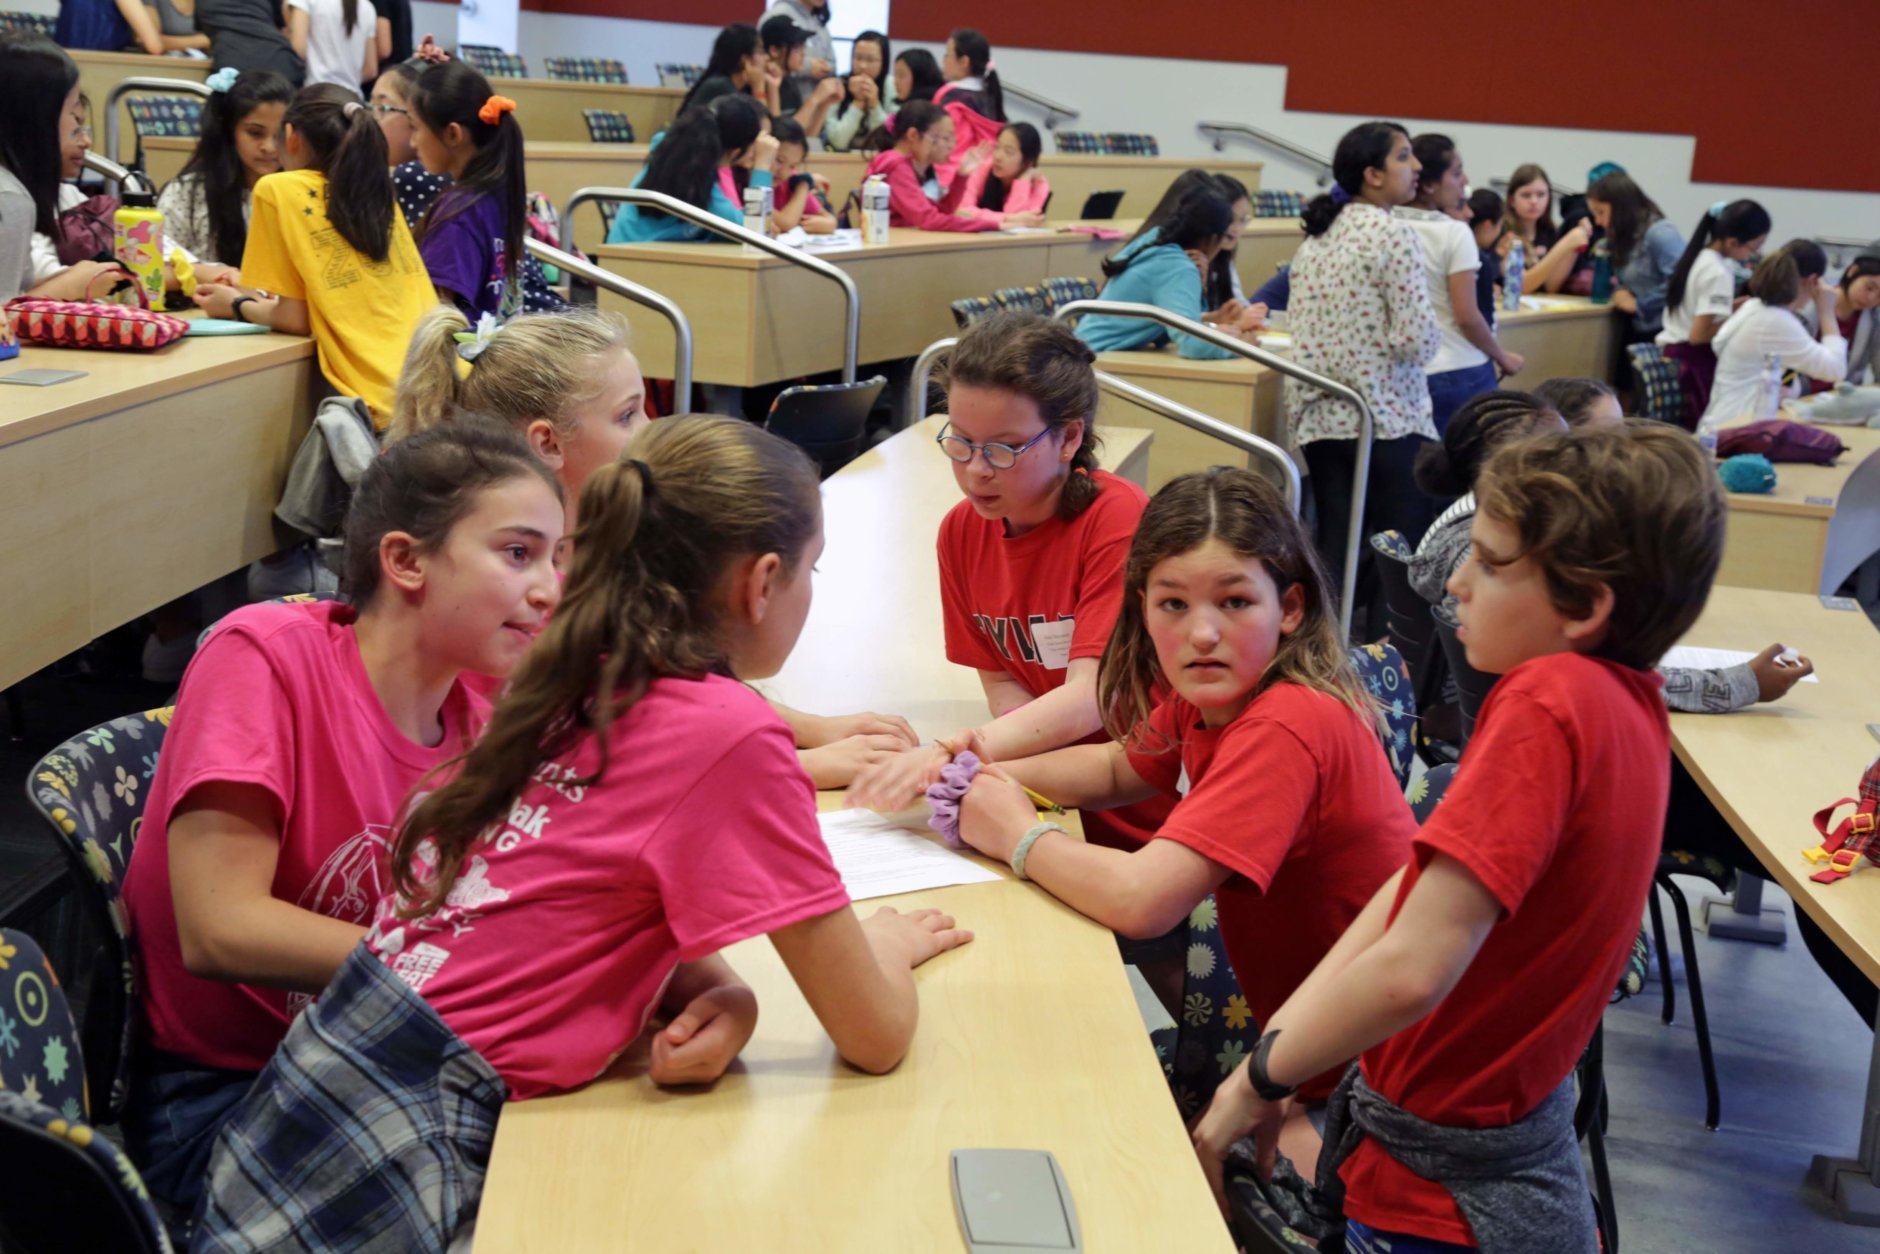 More than 130 girls participated in the inaugural InteGIRLS event at Montgomery College in Rockville, Maryland on May 18. (Courtesy/InteGIRLS) 